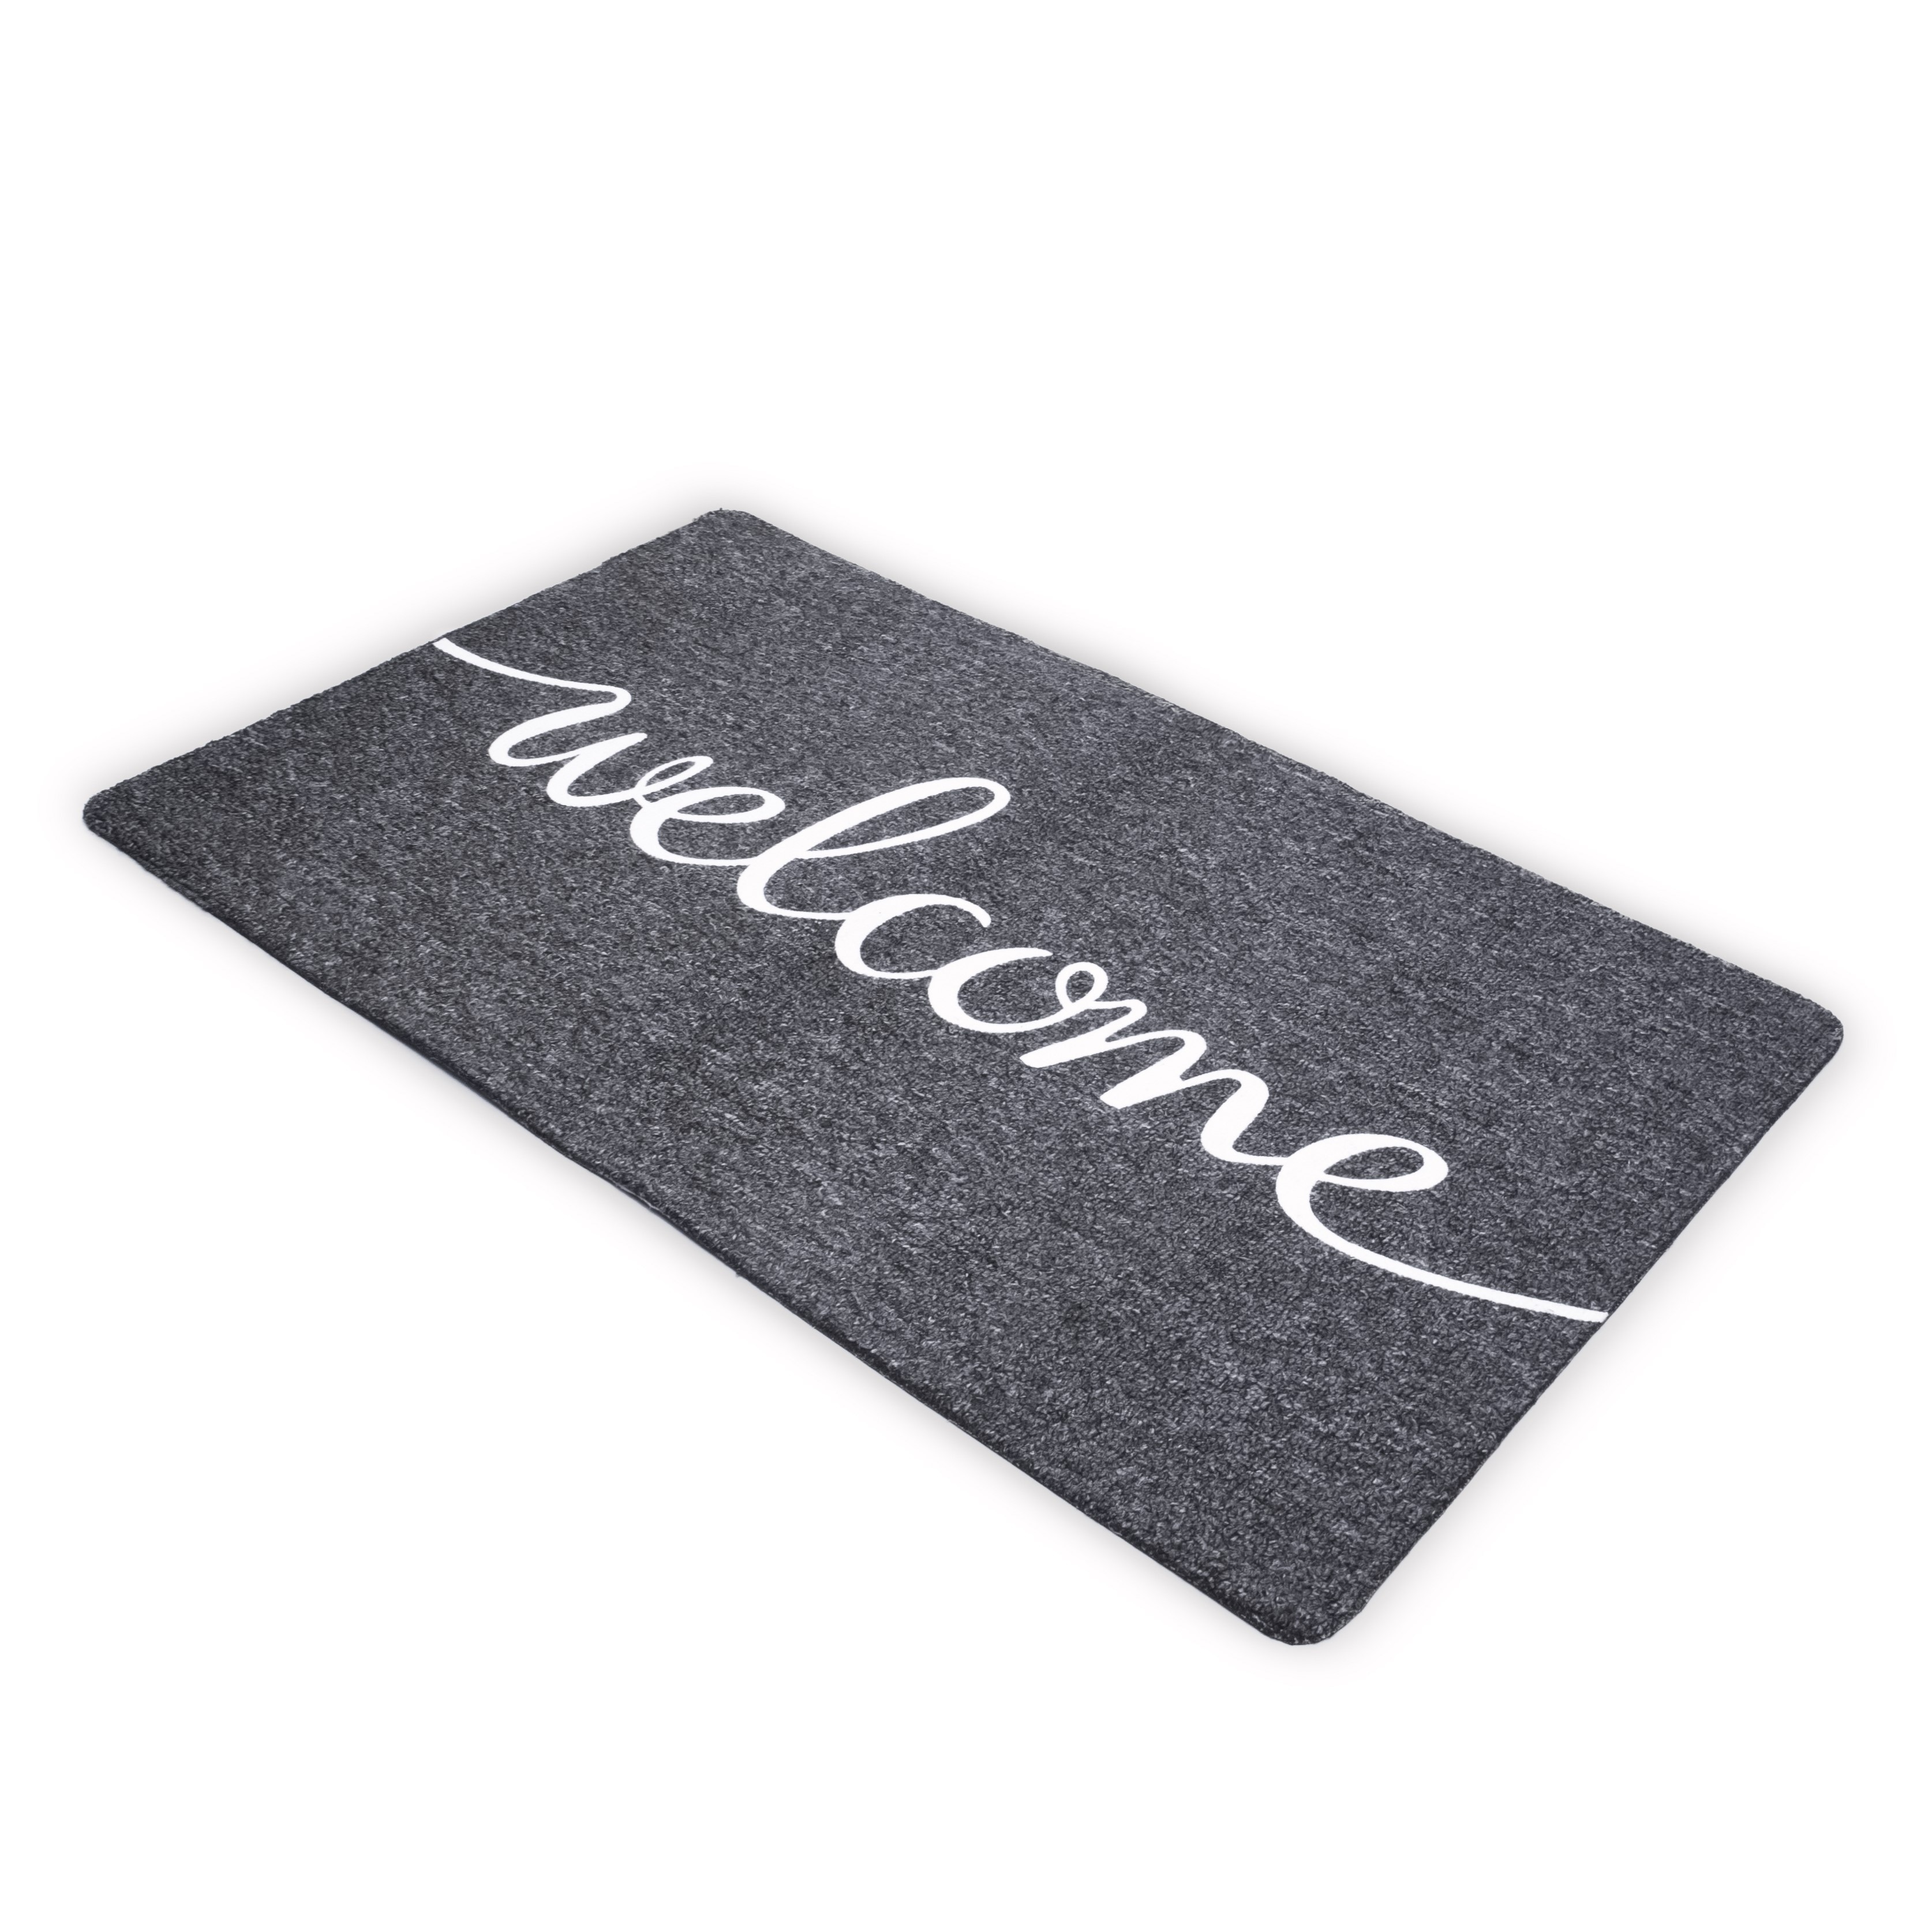 https://ak1.ostkcdn.com/images/products/is/images/direct/dc62323b5f7d019bff74ccde6017535177ae2ca0/Mascot-Hardware-%22Welcome%22-Letter-Printed-Non-Slip-Doormats-For-Indoor-Outdoor%2C-Grey.jpg